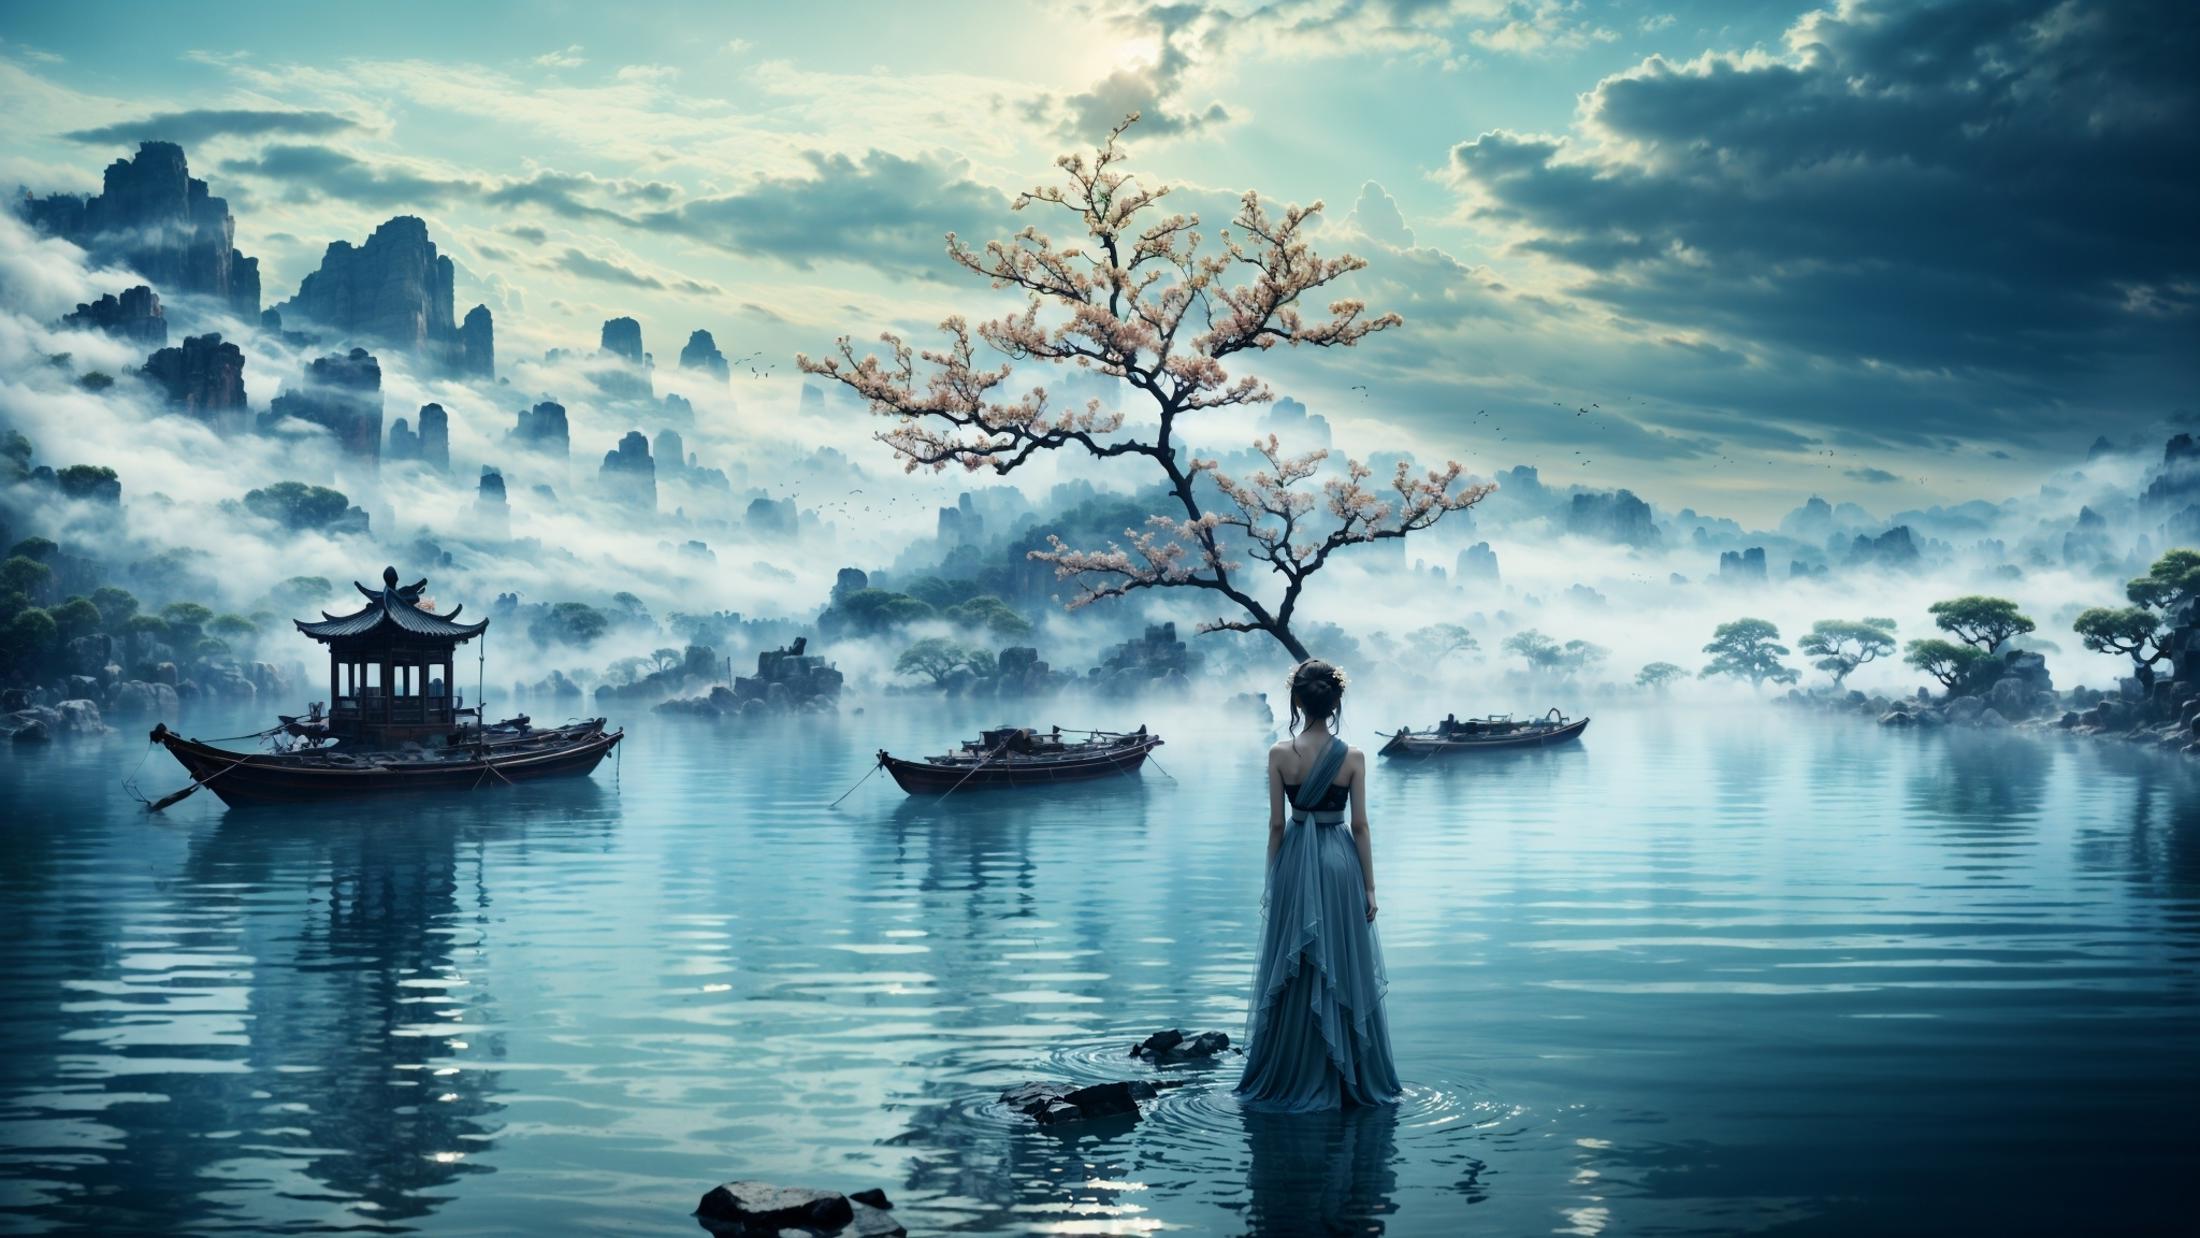 A woman in a flowing dress stands by a tree overlooking a lake with several boats.